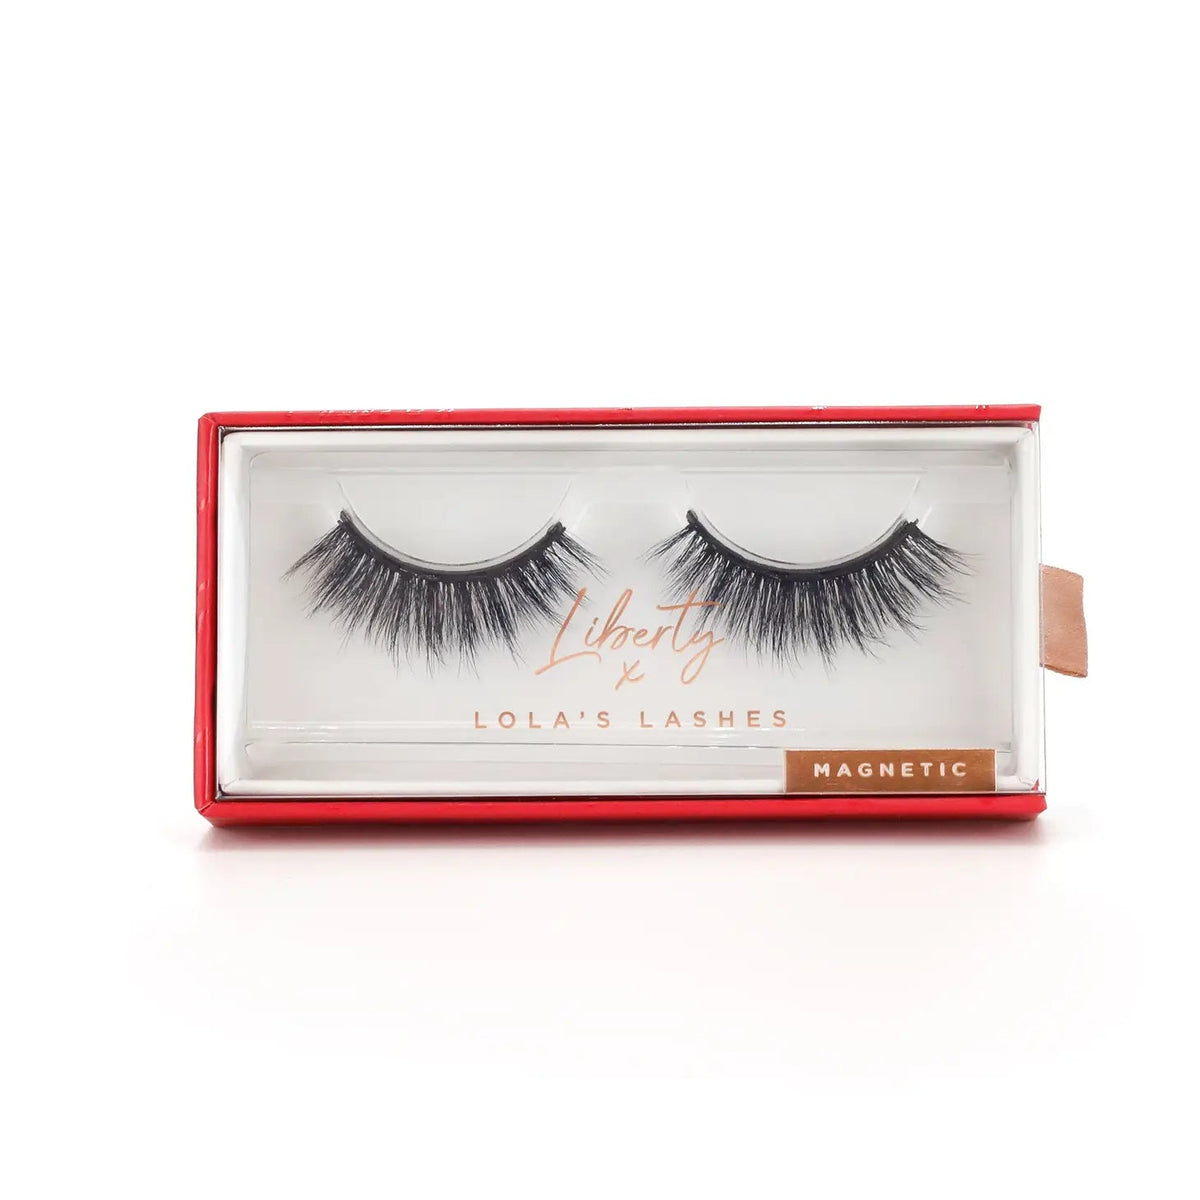 Lola's Lashes x Liberty After Party Magnetic Lashes - Blend Box